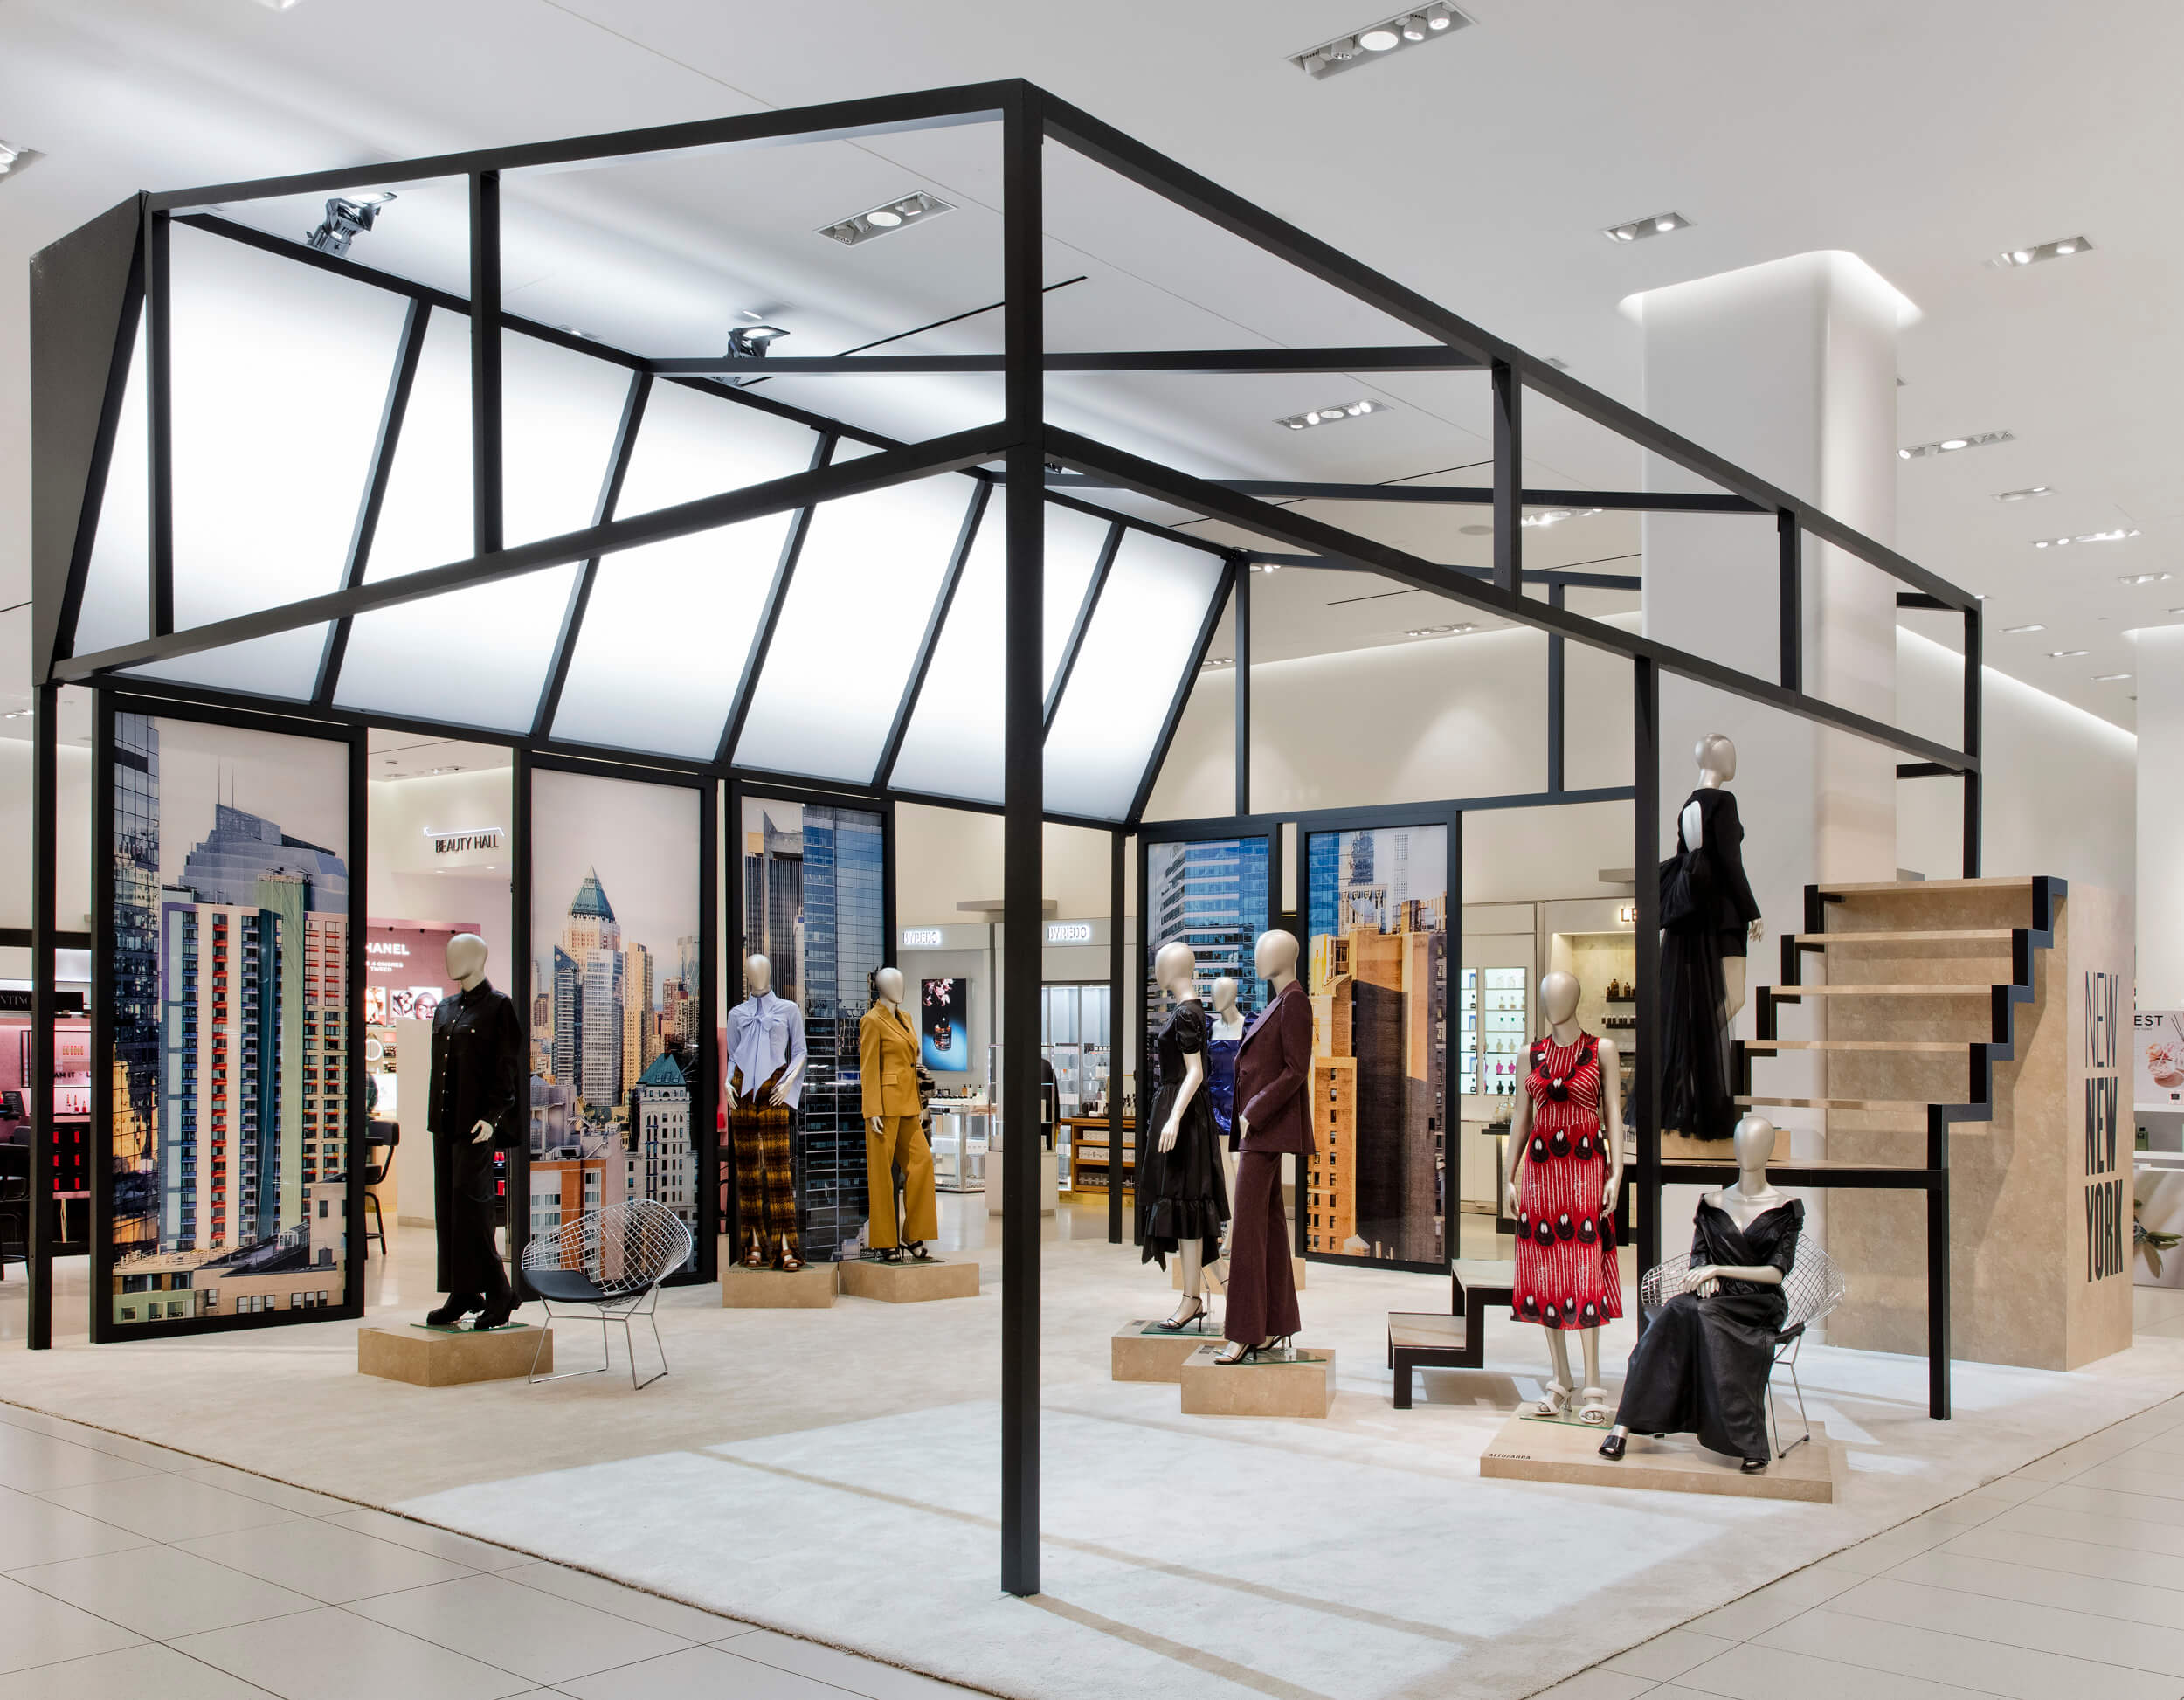 Inside Nordstrom's New York flagship store, which has Ethan